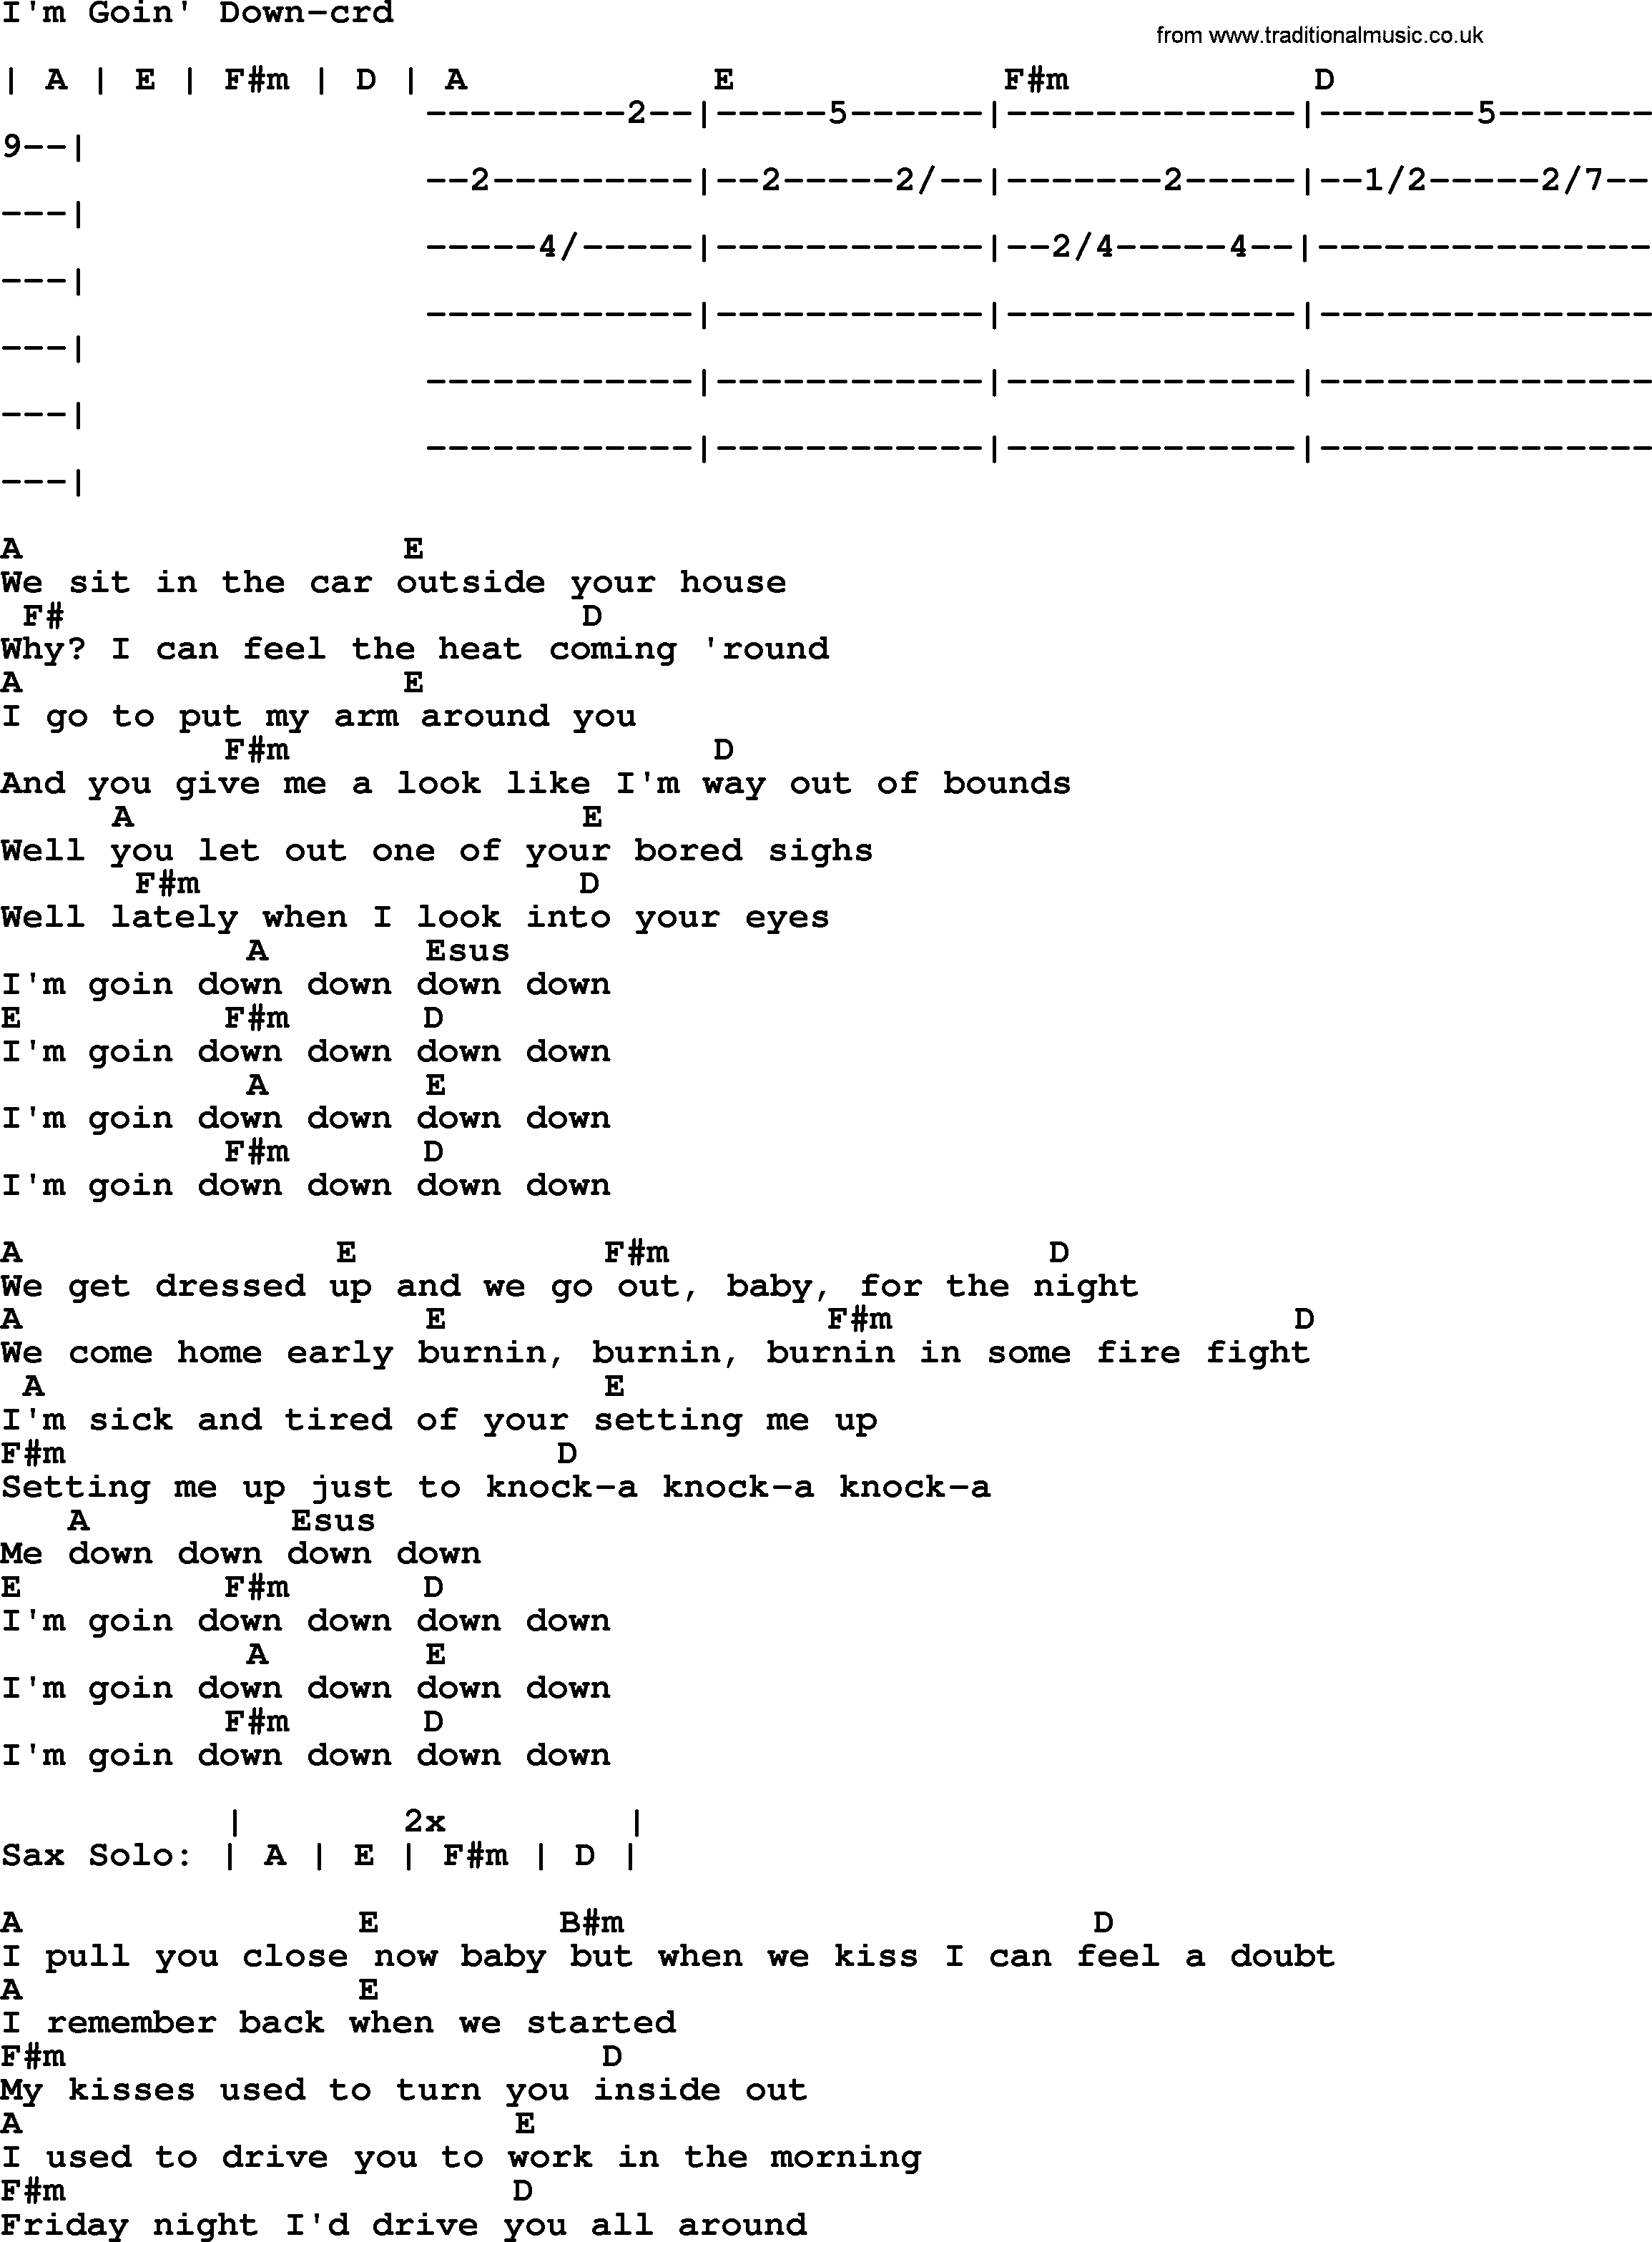 Bruce Springsteen song: I'm Goin' Down, lyrics and chords